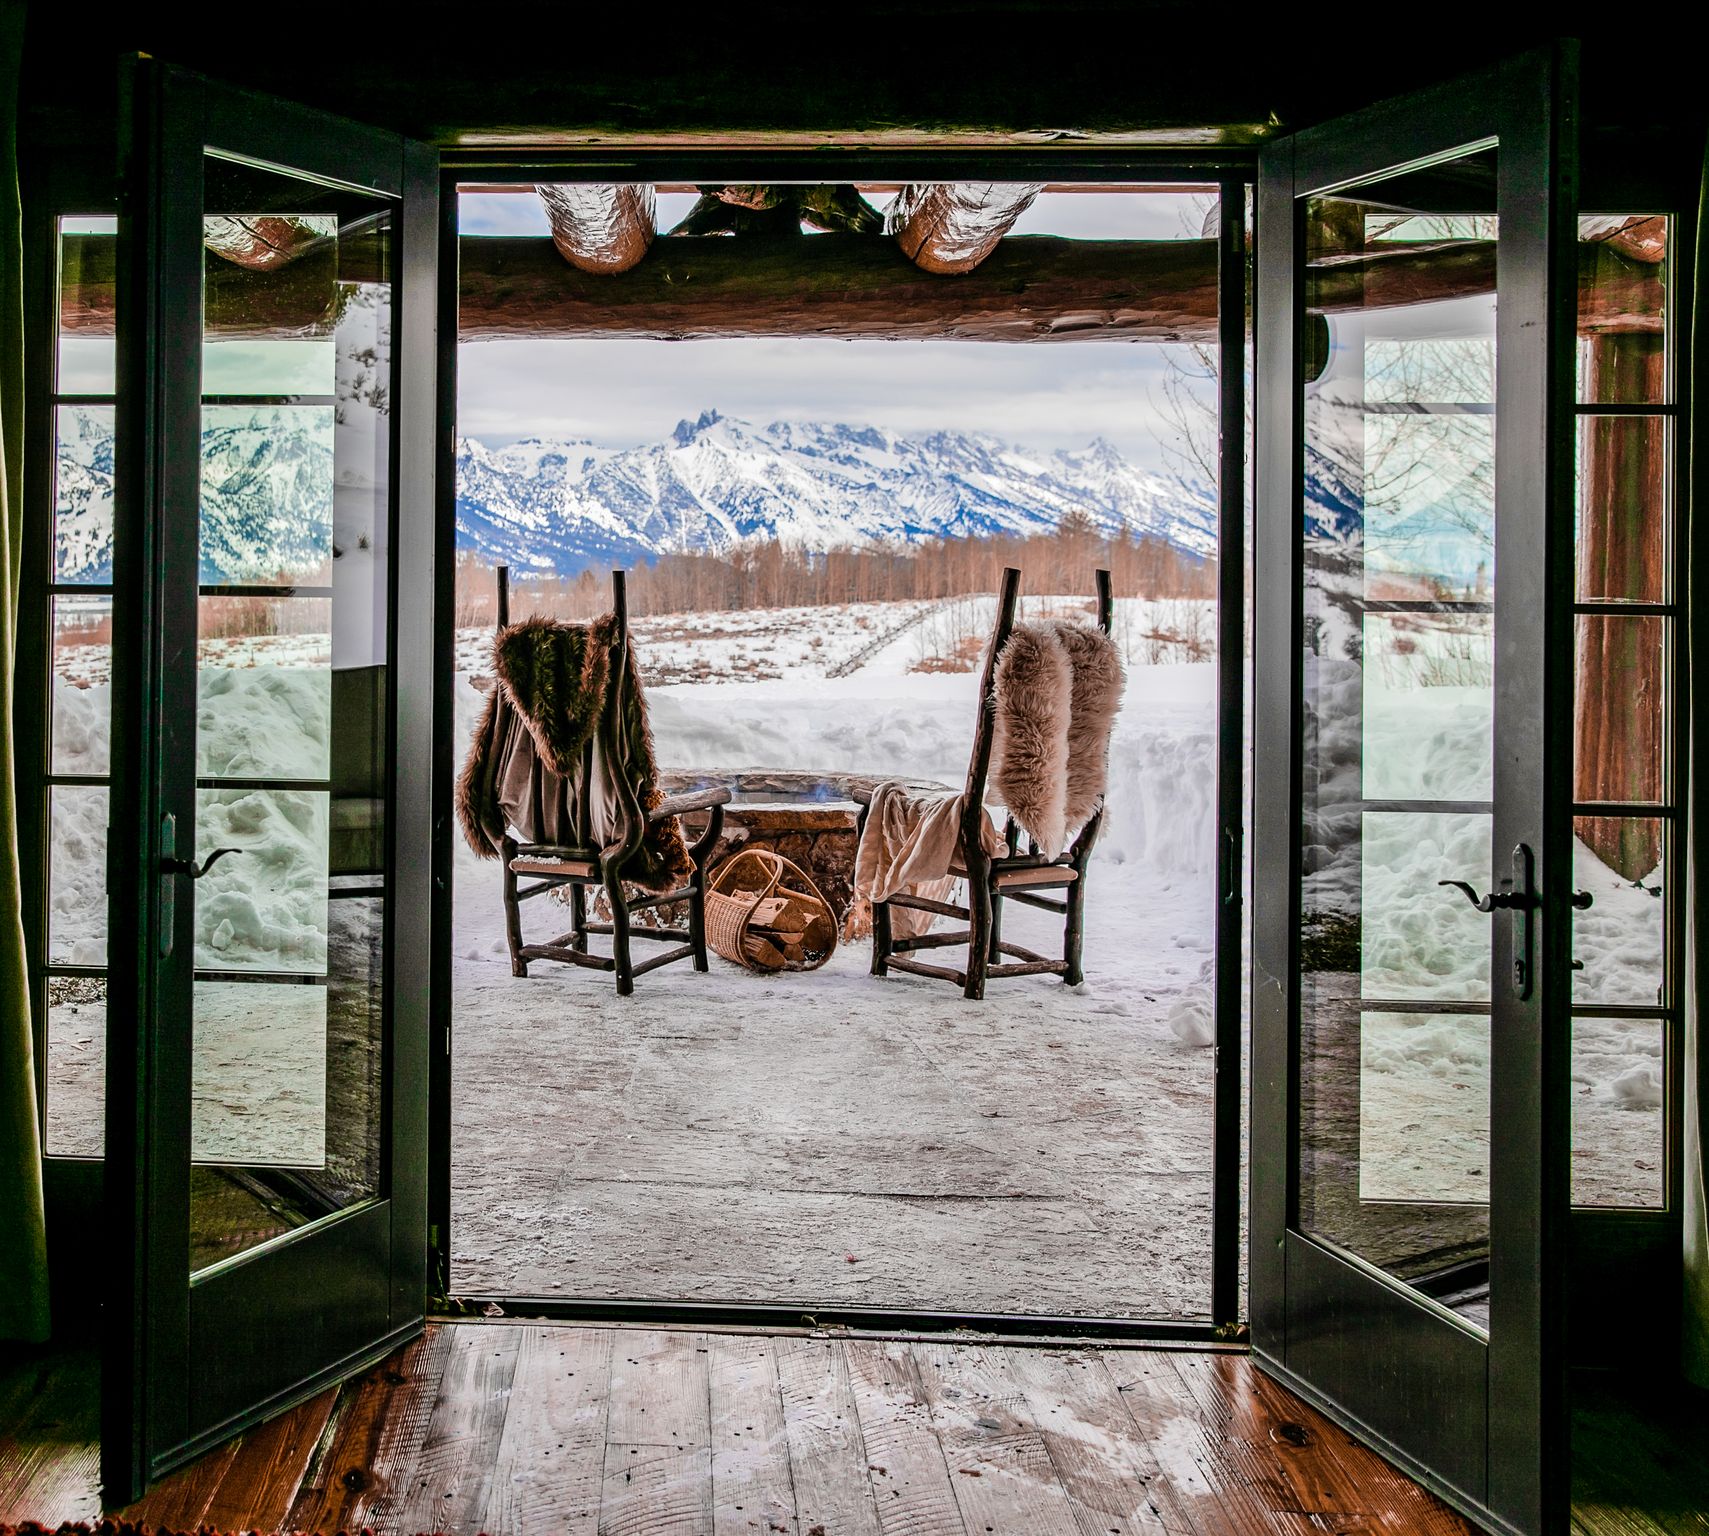 The View from our Luxury Jackson Hole Vacation Rentals